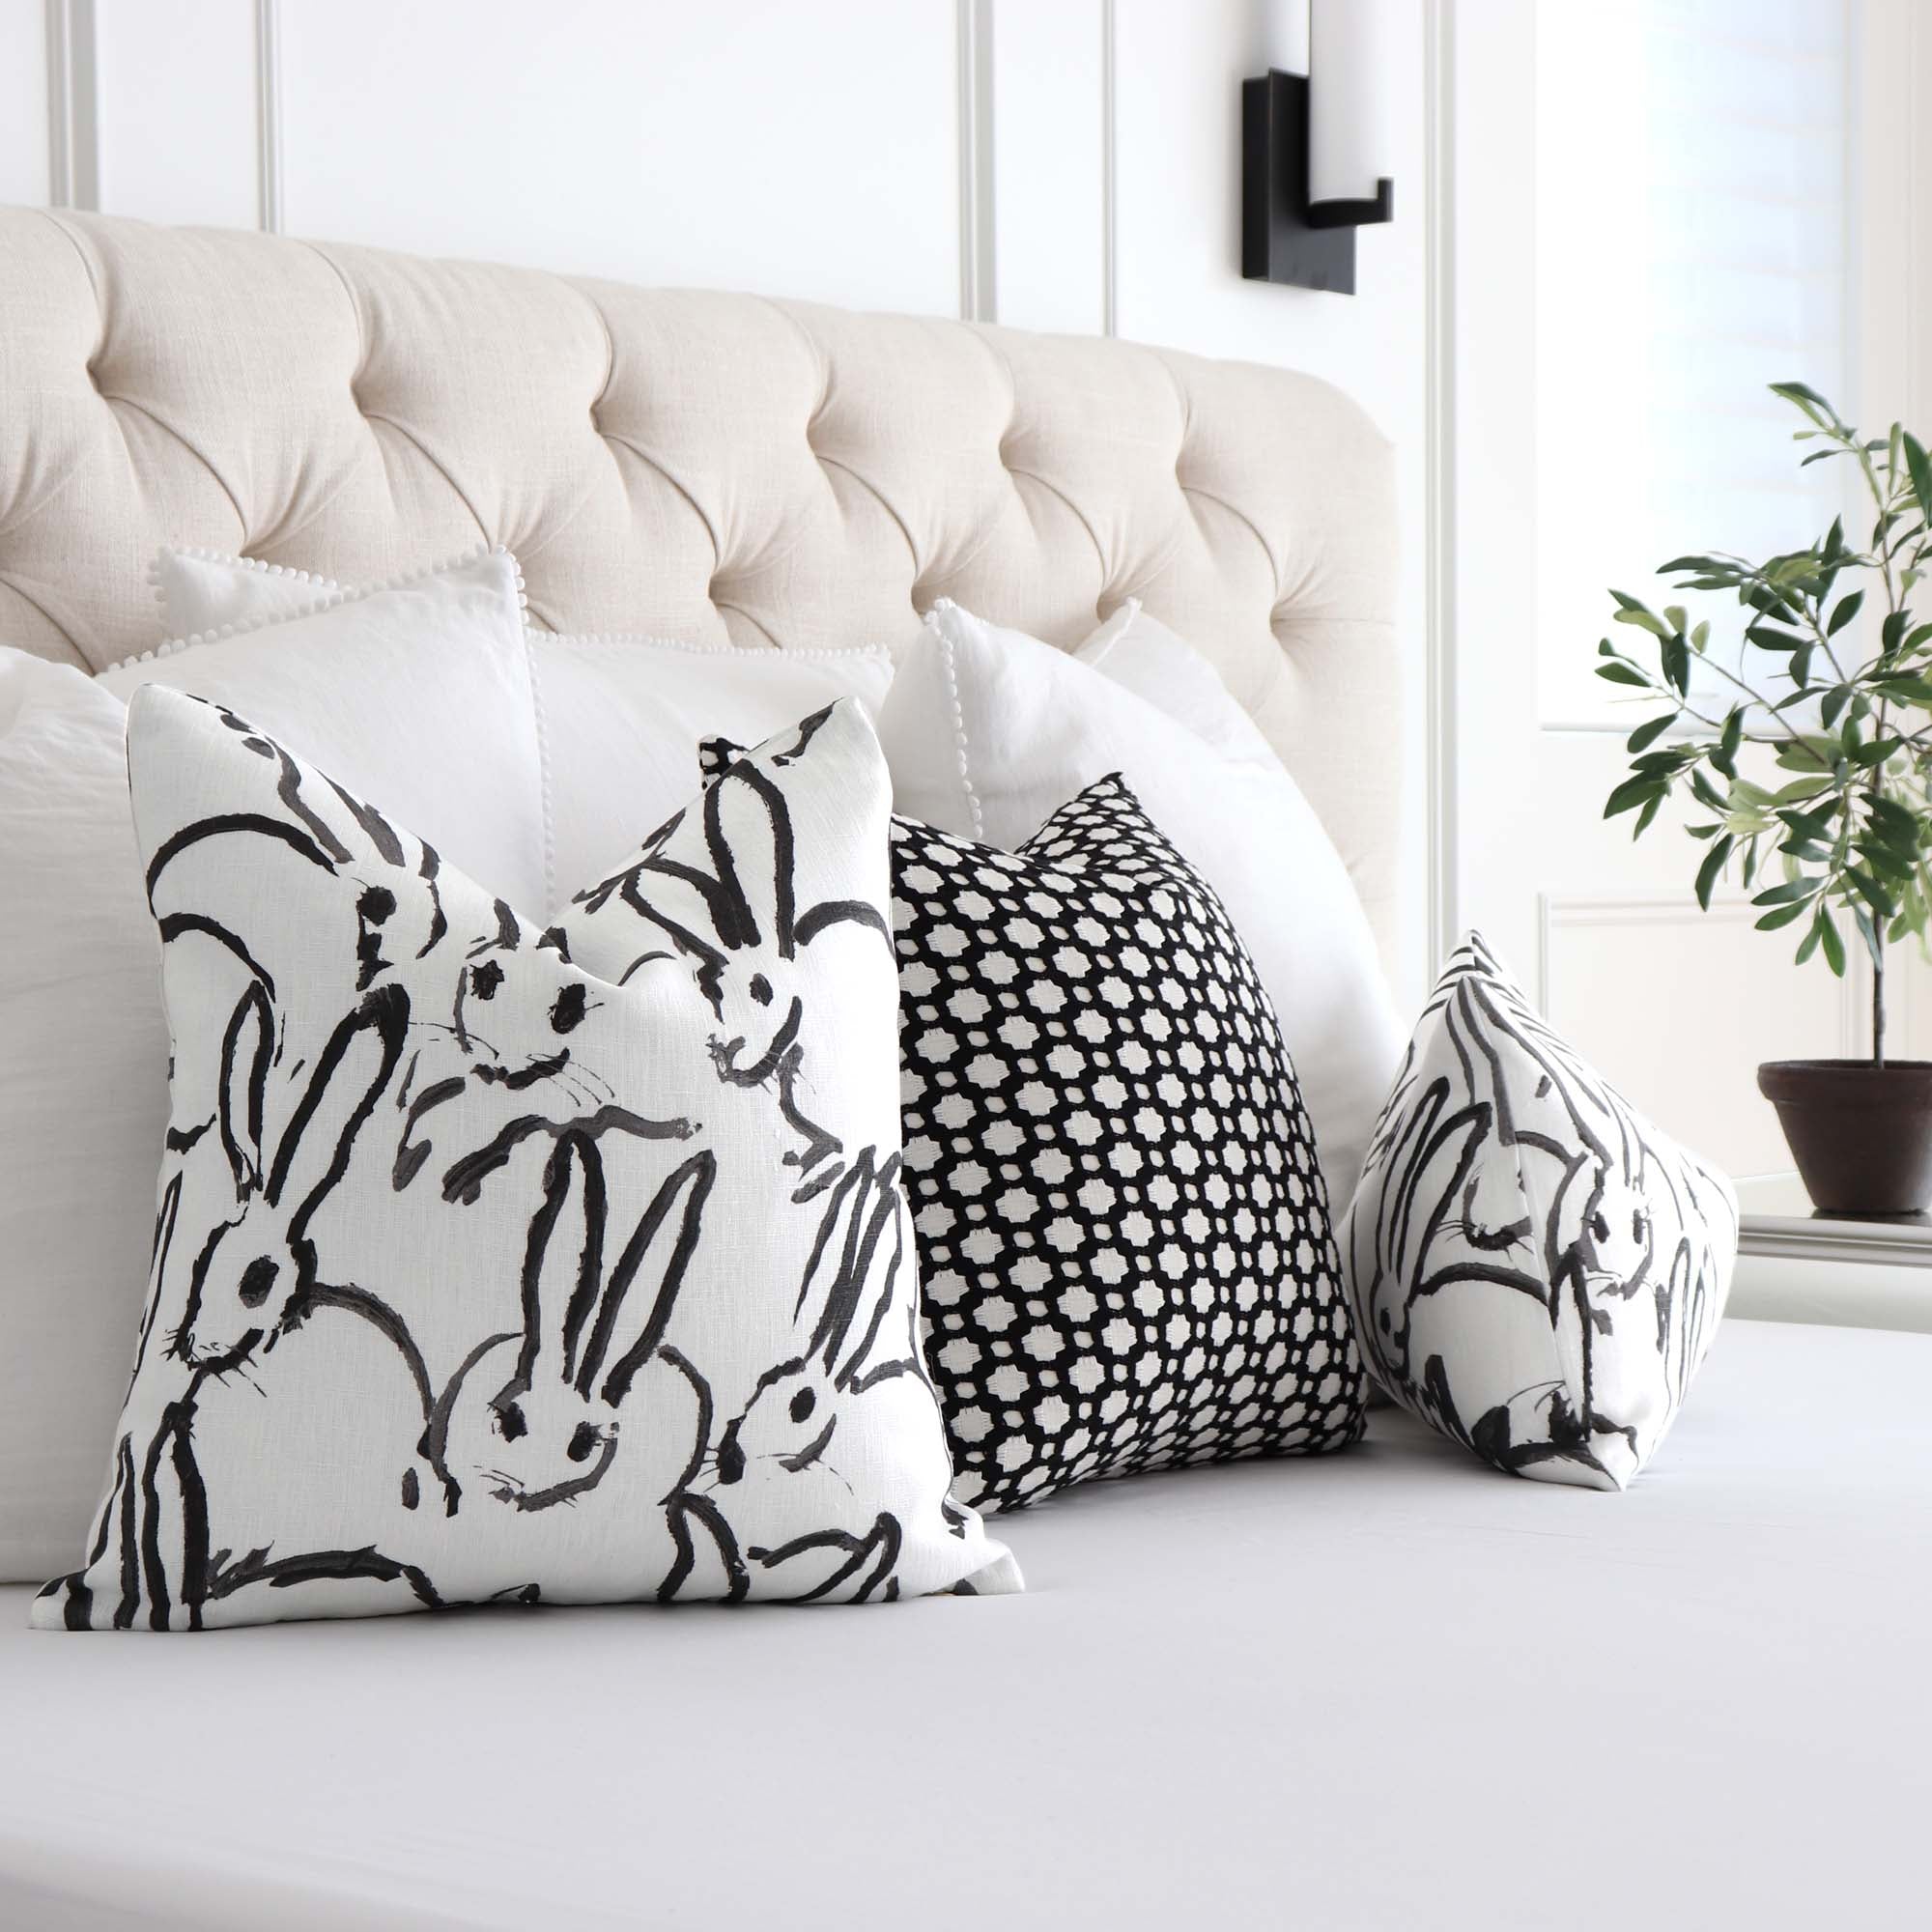 Luxape Pillowcase - 18in - Hypebeast Room Decor - Off White Room Pillow Cover - Hype Beats Pillows - Black and White Pillows - Bape Decorations 